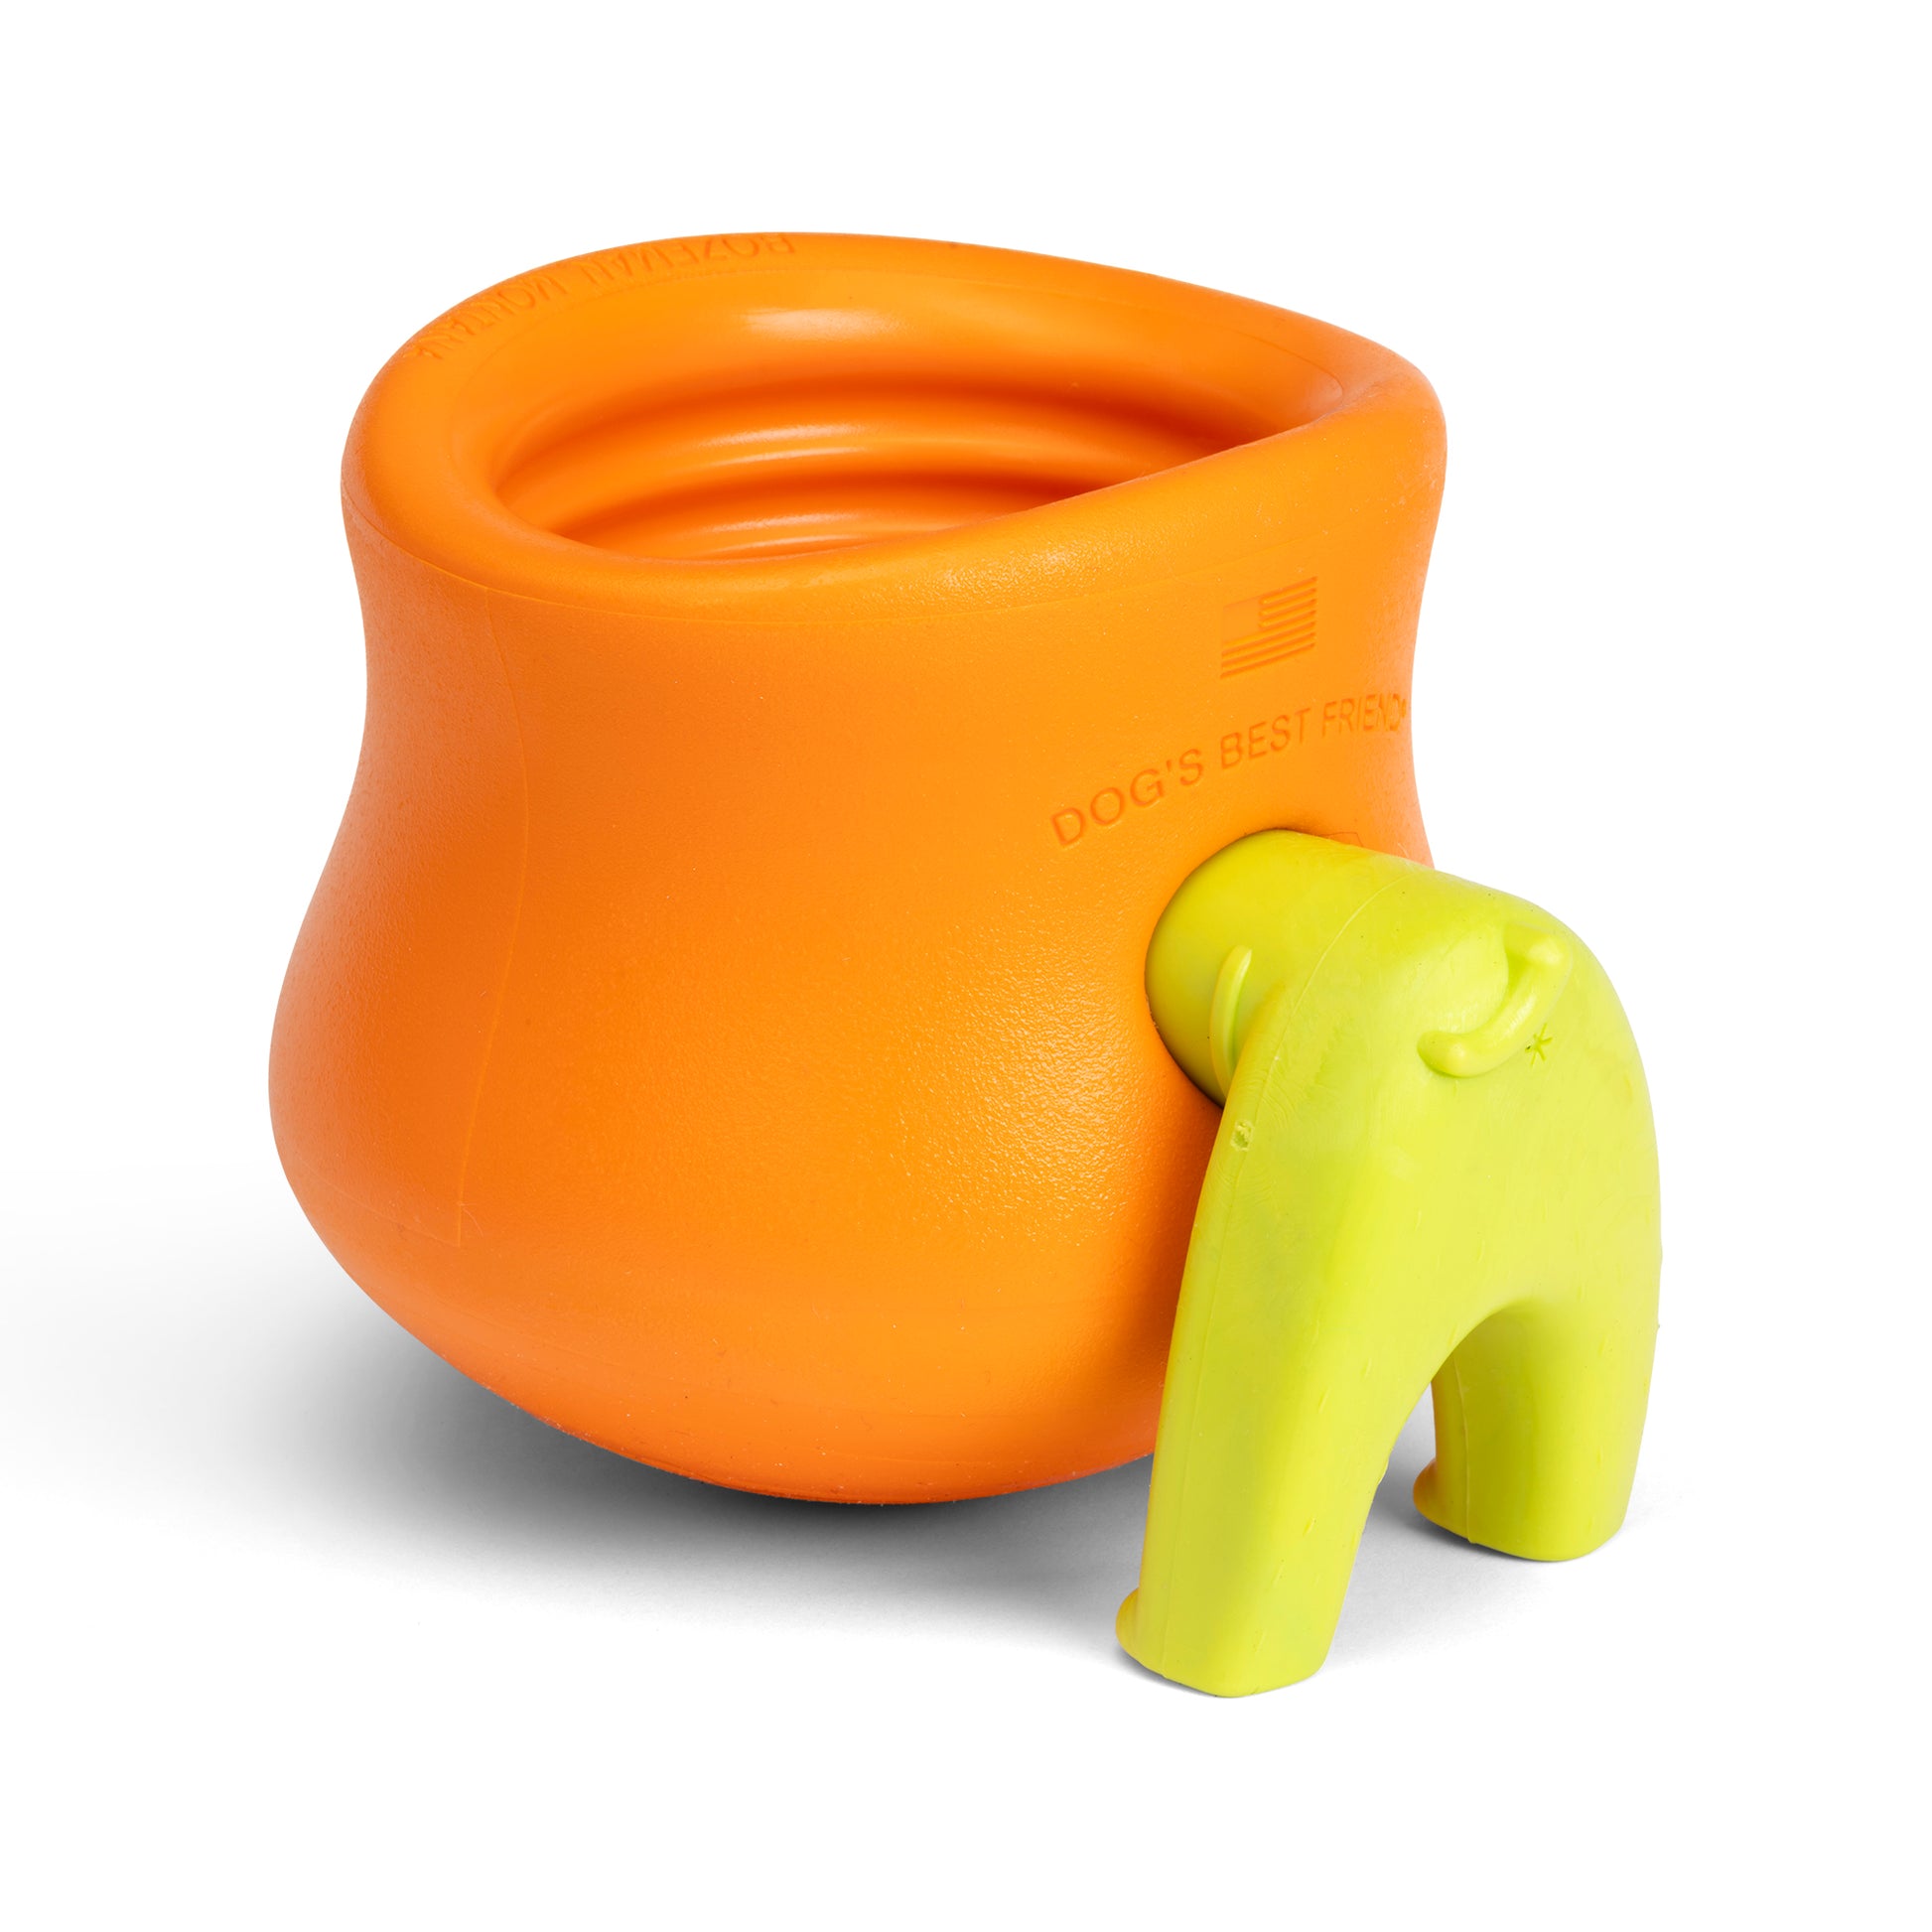 Rear view of an orange West Paw Toppl with a green West Paw Toppl Stopper plugged into it